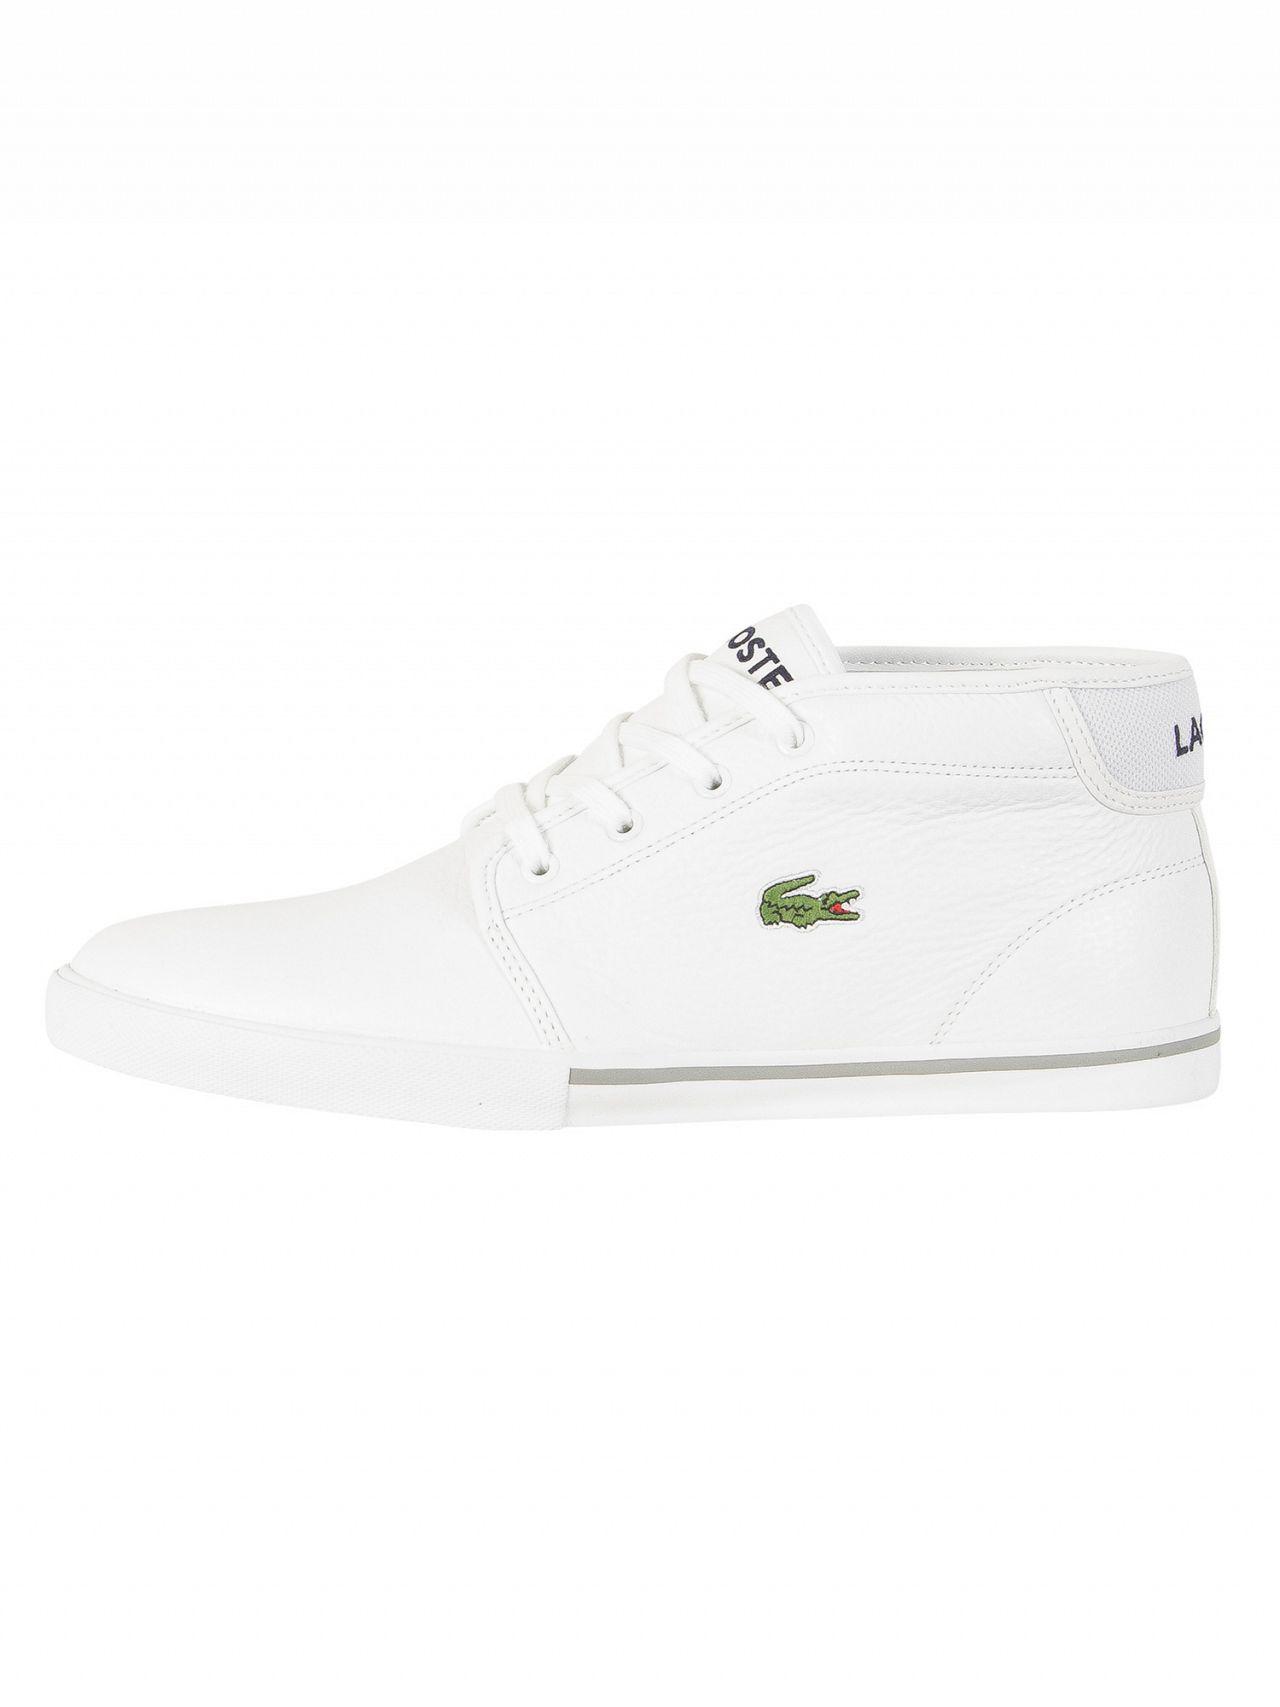 Lacoste Leather Ampthill Trainers in 